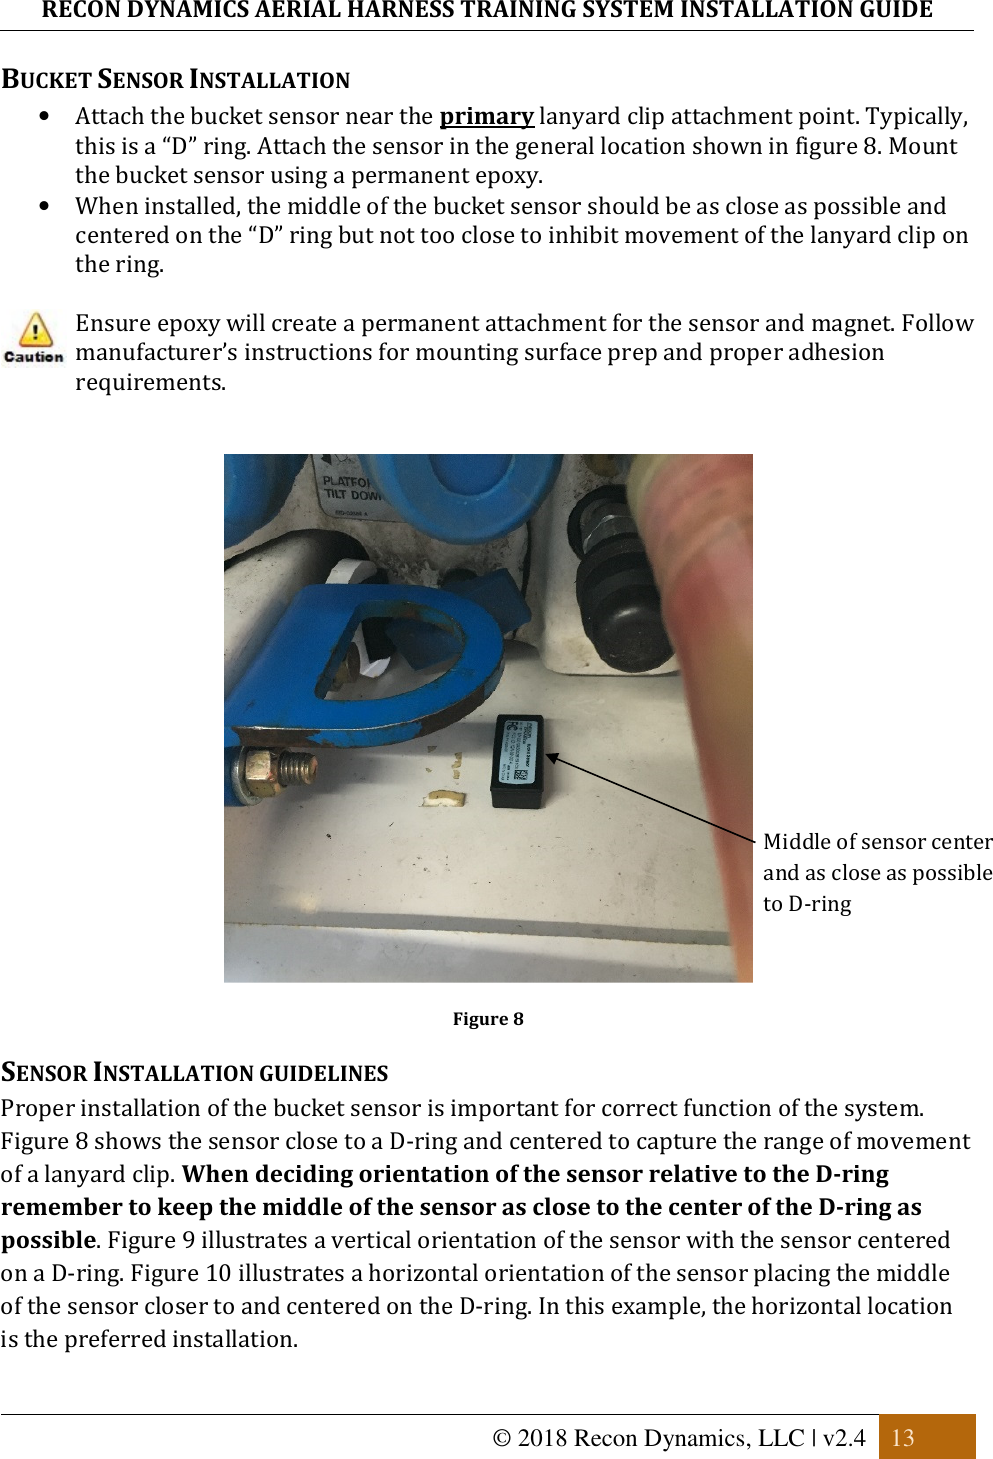 RECON DYNAMICS AERIAL HARNESS TRAINING SYSTEM INSTALLATION GUIDE   © 2018 Recon Dynamics, LLC | v2.4  13  BUCKET SENSOR INSTALLATION • Attach the bucket sensor near the primary lanyard clip attachment point. Typically, this is a “D” ring. Attach the sensor in the general location shown in figure 8. Mount the bucket sensor using a permanent epoxy.  • When installed, the middle of the bucket sensor should be as close as possible and centered on the “D” ring but not too close to inhibit movement of the lanyard clip on the ring.   Ensure epoxy will create a permanent attachment for the sensor and magnet. Follow manufacturer’s instructions for mounting surface prep and proper adhesion requirements.     Figure 8 SENSOR INSTALLATION GUIDELINES Proper installation of the bucket sensor is important for correct function of the system. Figure 8 shows the sensor close to a D-ring and centered to capture the range of movement of a lanyard clip. When deciding orientation of the sensor relative to the D-ring remember to keep the middle of the sensor as close to the center of the D-ring as possible. Figure 9 illustrates a vertical orientation of the sensor with the sensor centered on a D-ring. Figure 10 illustrates a horizontal orientation of the sensor placing the middle of the sensor closer to and centered on the D-ring. In this example, the horizontal location is the preferred installation. Middle of sensor center and as close as possible to D-ring   